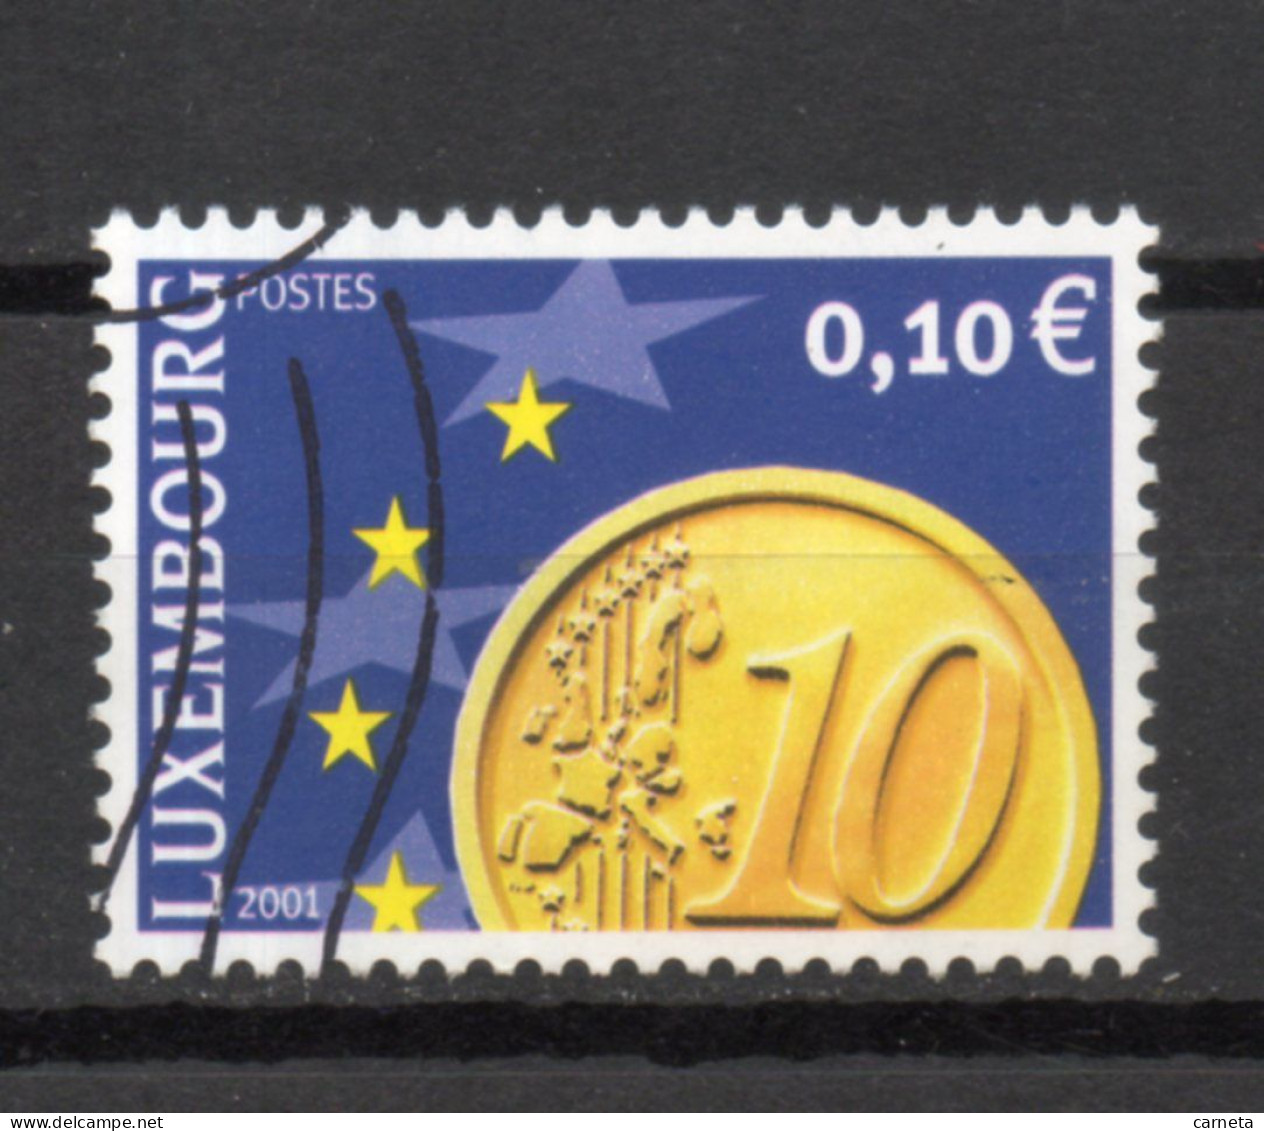 LUXEMBOURG    N° 1498     OBLITERE   COTE 0.20€    MONNAIE EURO - Usados